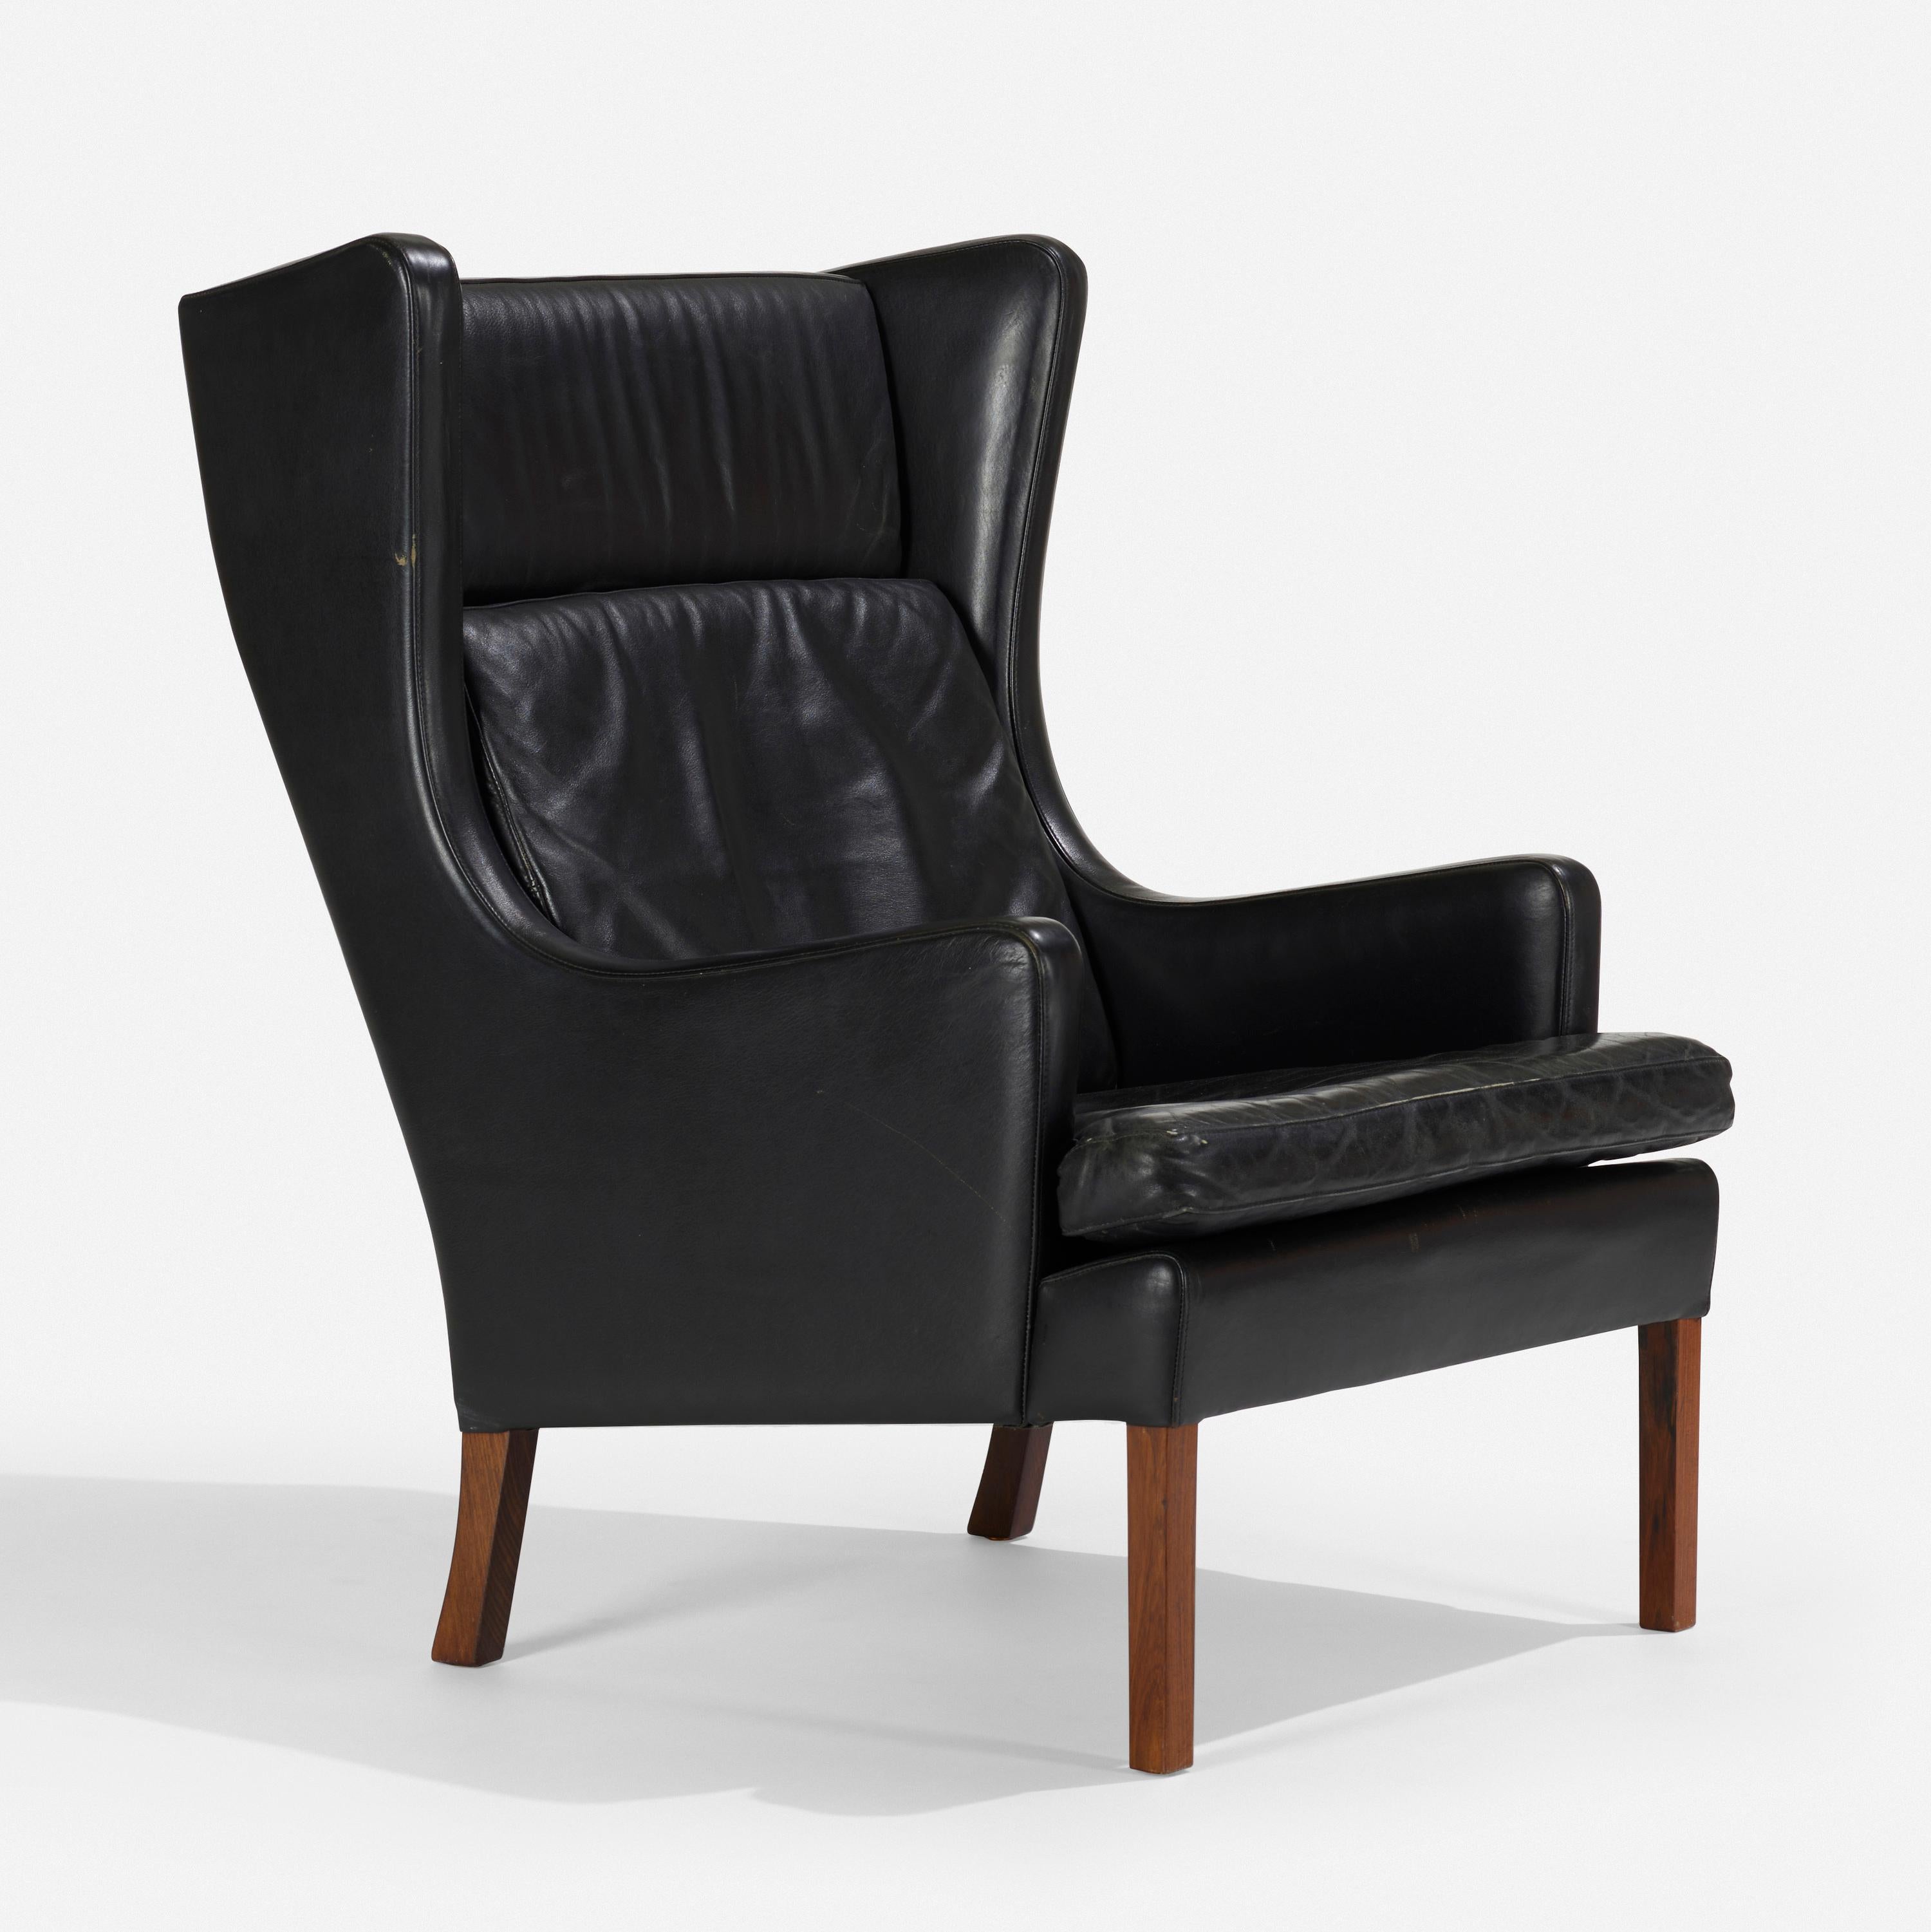 Pair of Danish Black Leather Upholstered Wingback Chairs In Good Condition For Sale In Montreal, QC